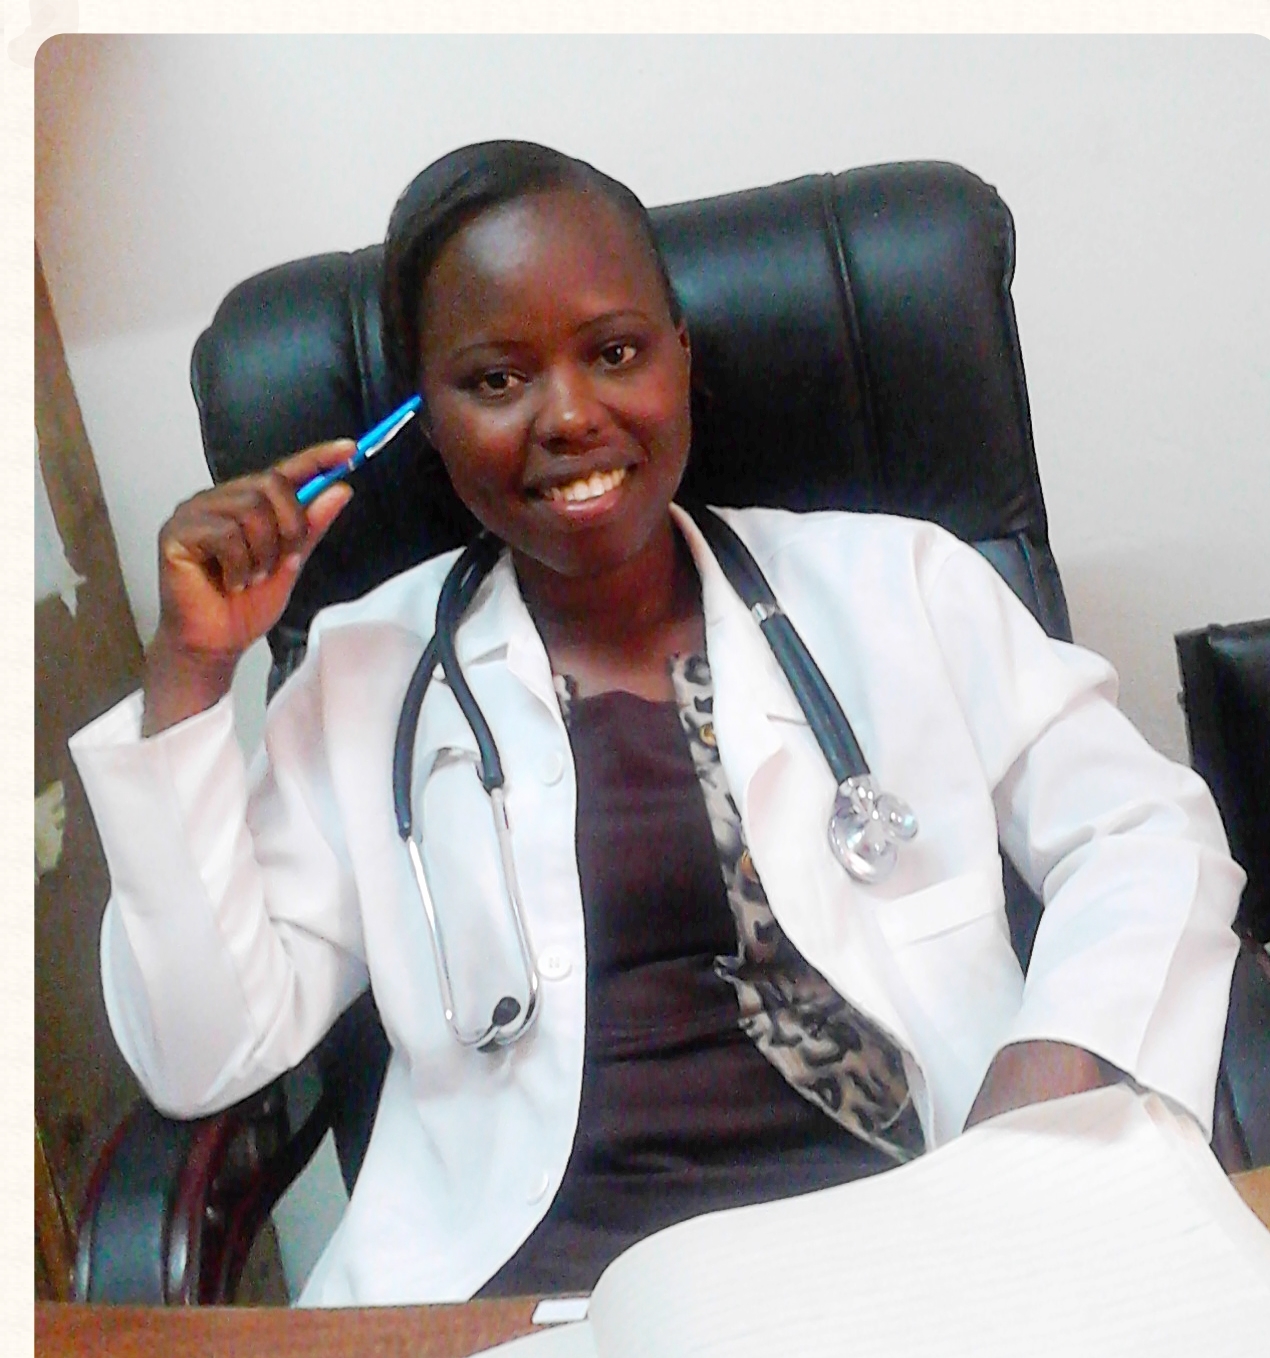  Sanaipei in her new role as Clinical Officer. 